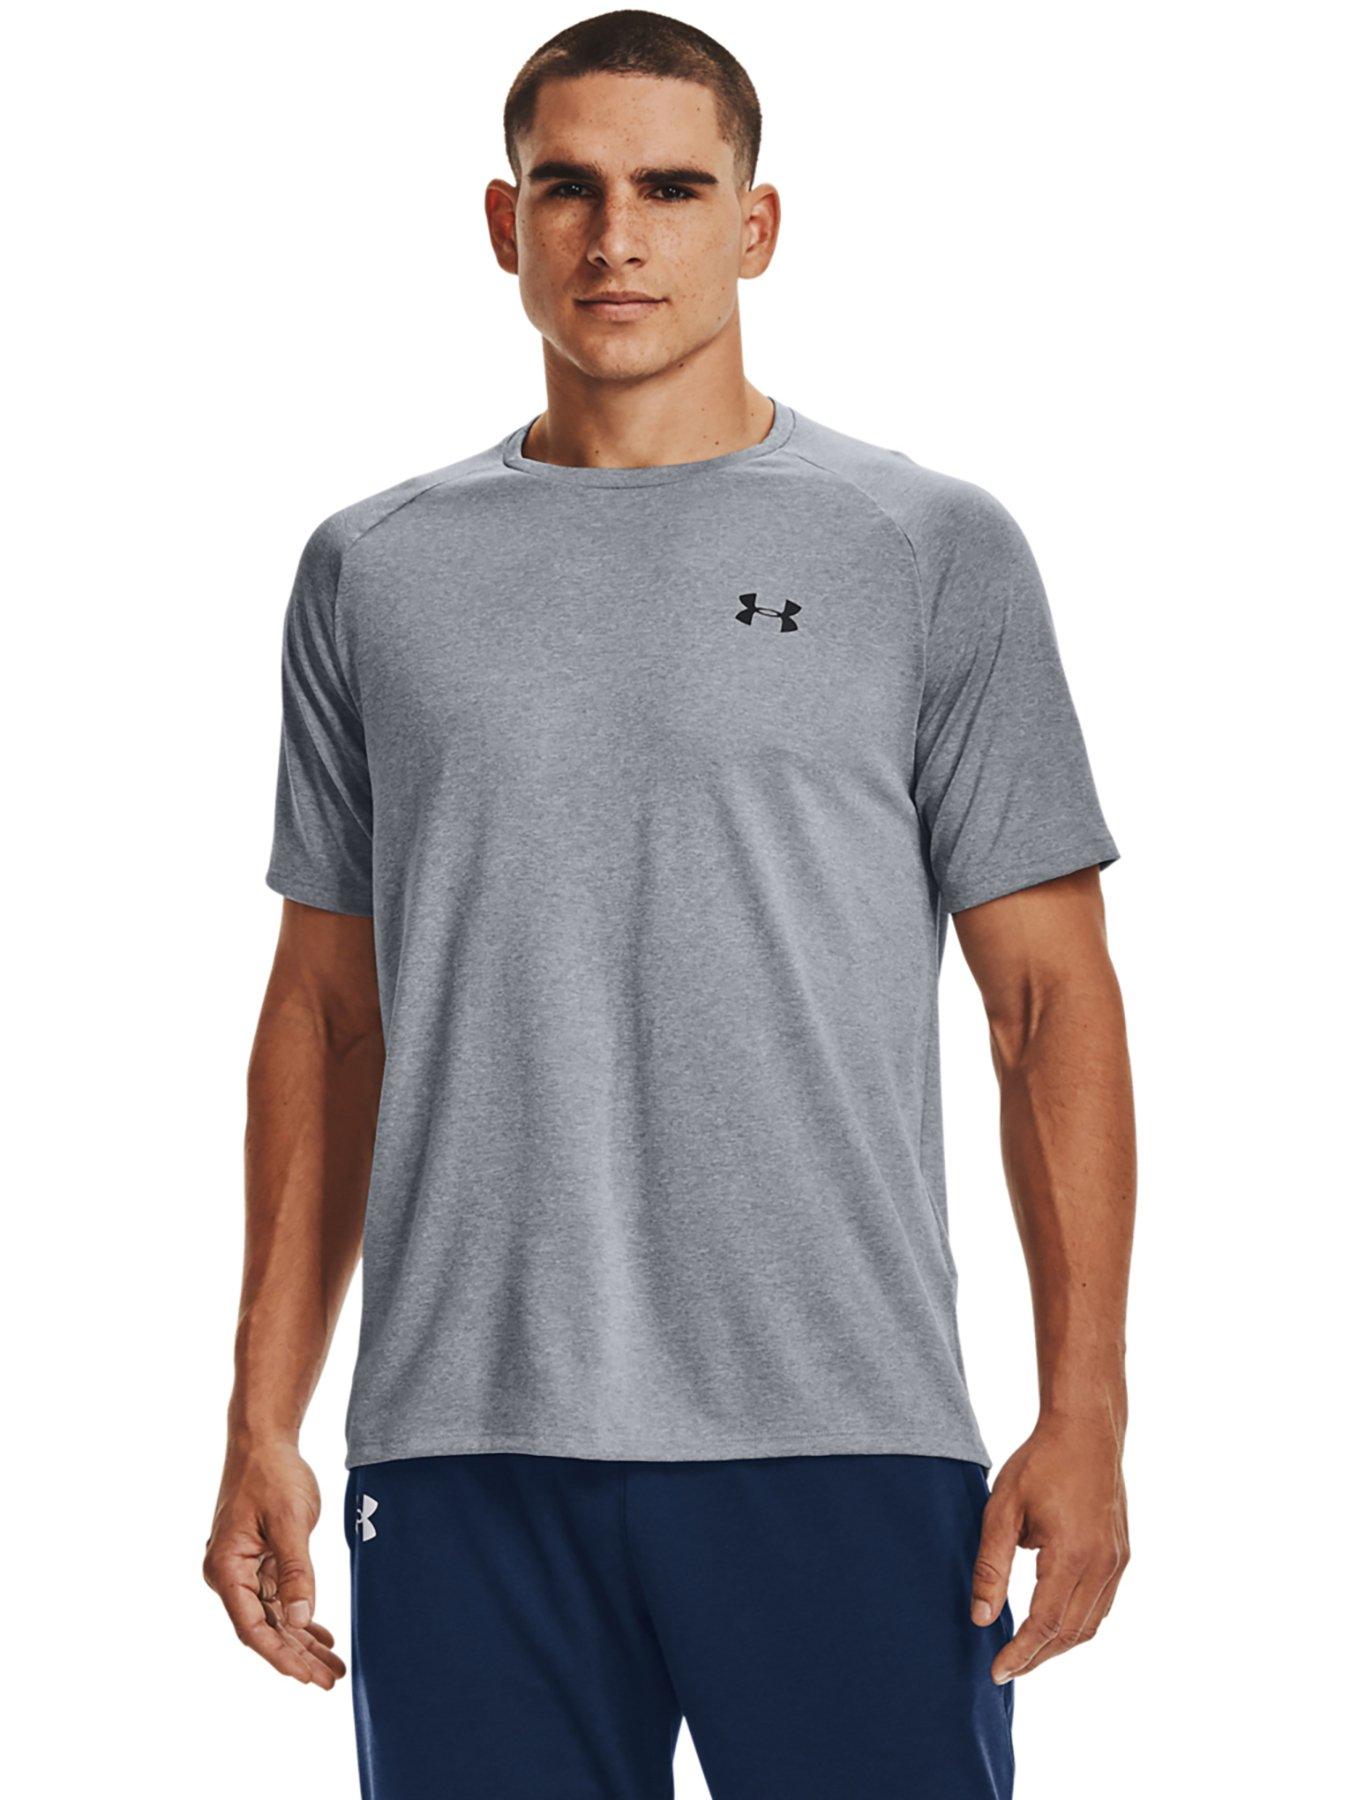 Under Armour Freedom by Air T-Shirt (Steel/Red), 2XL